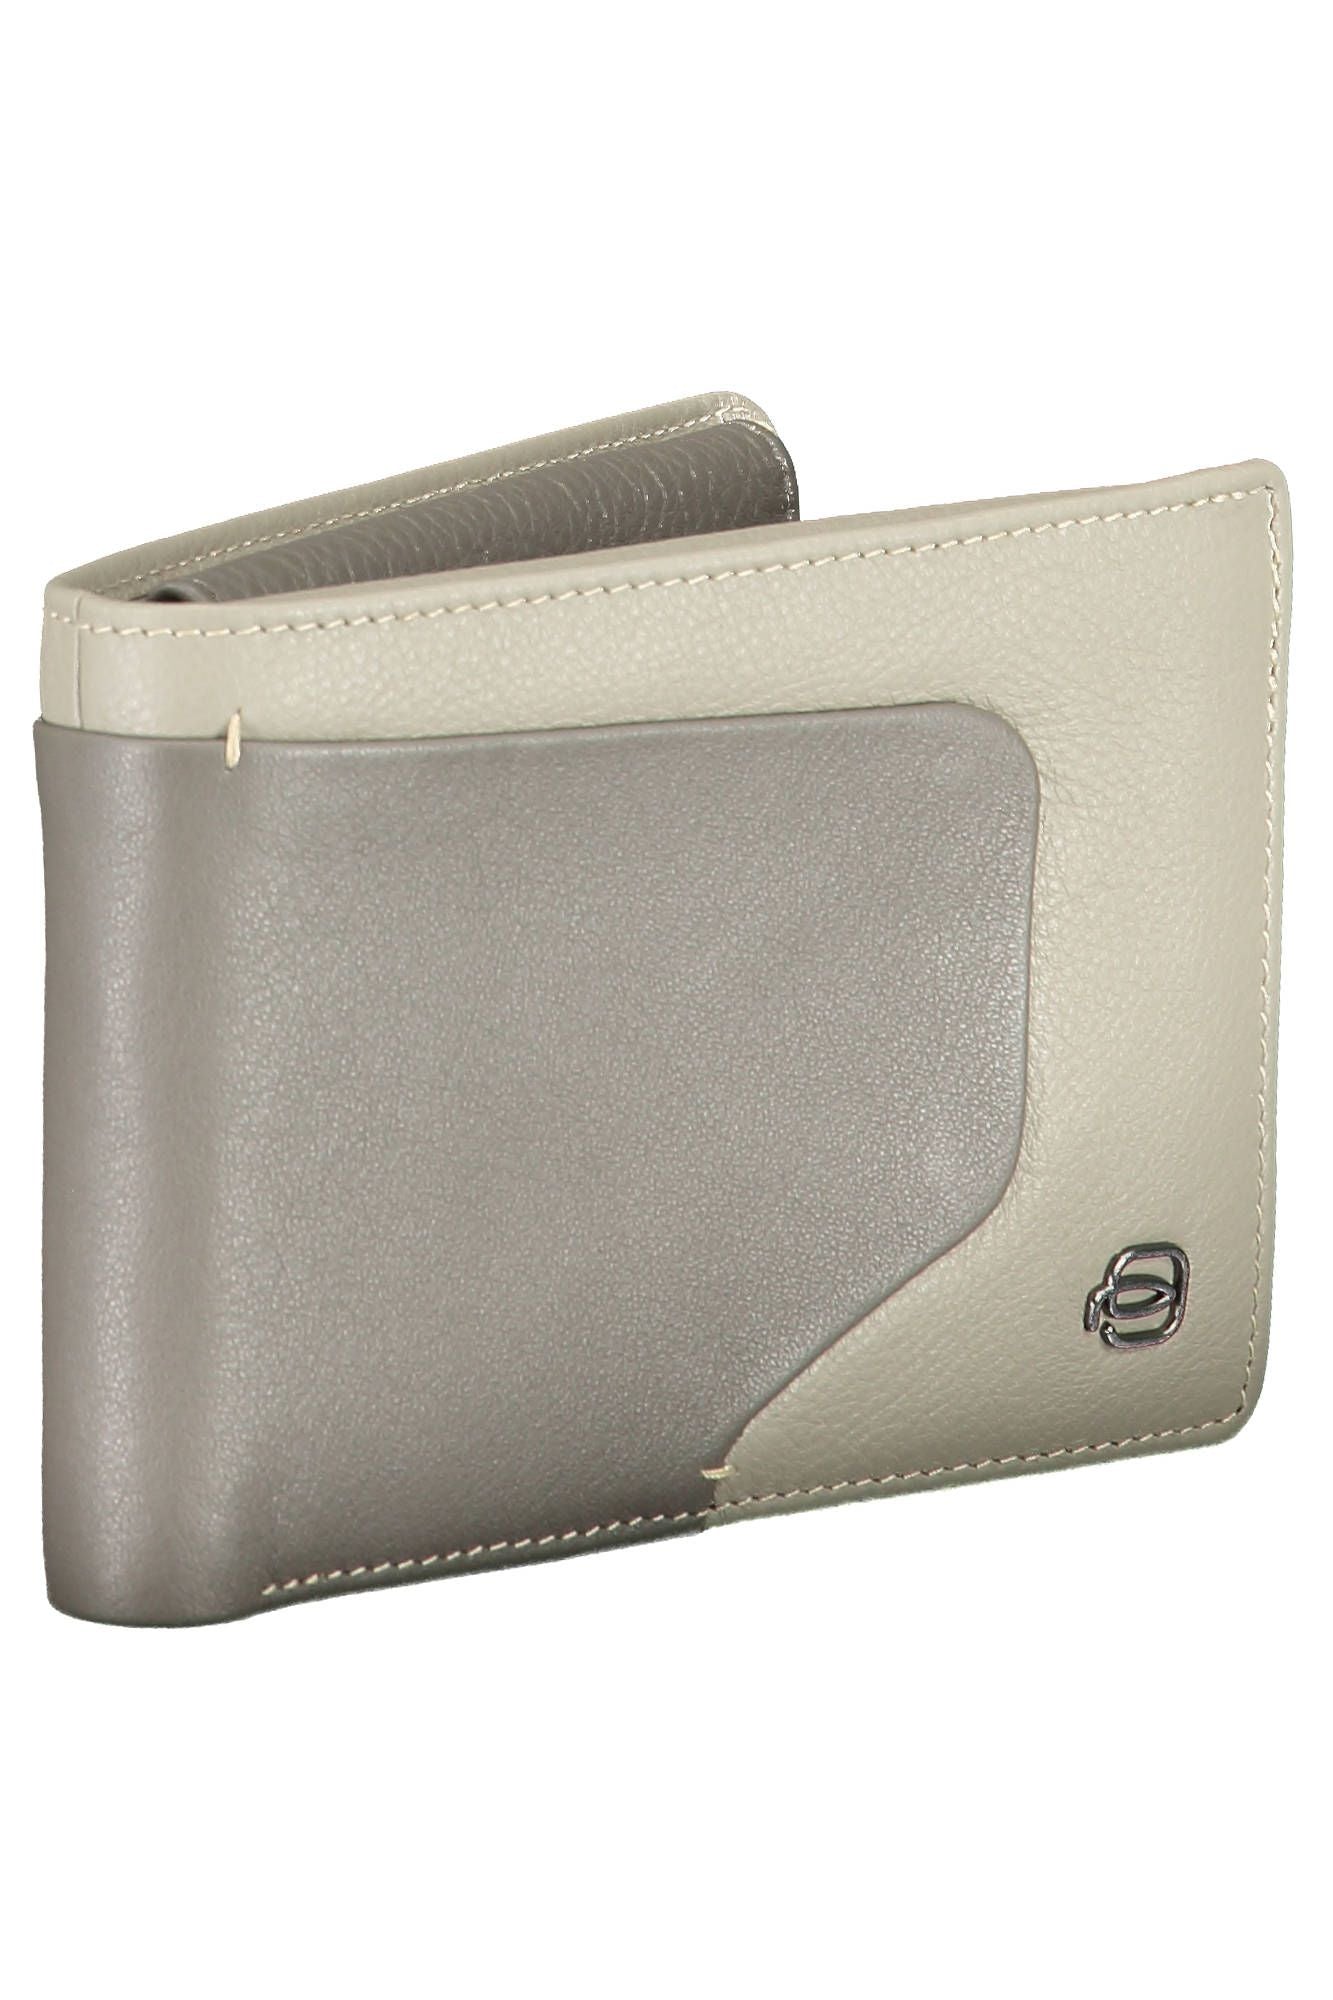 Elegant Gray Leather RFID Wallet with Coin Purse